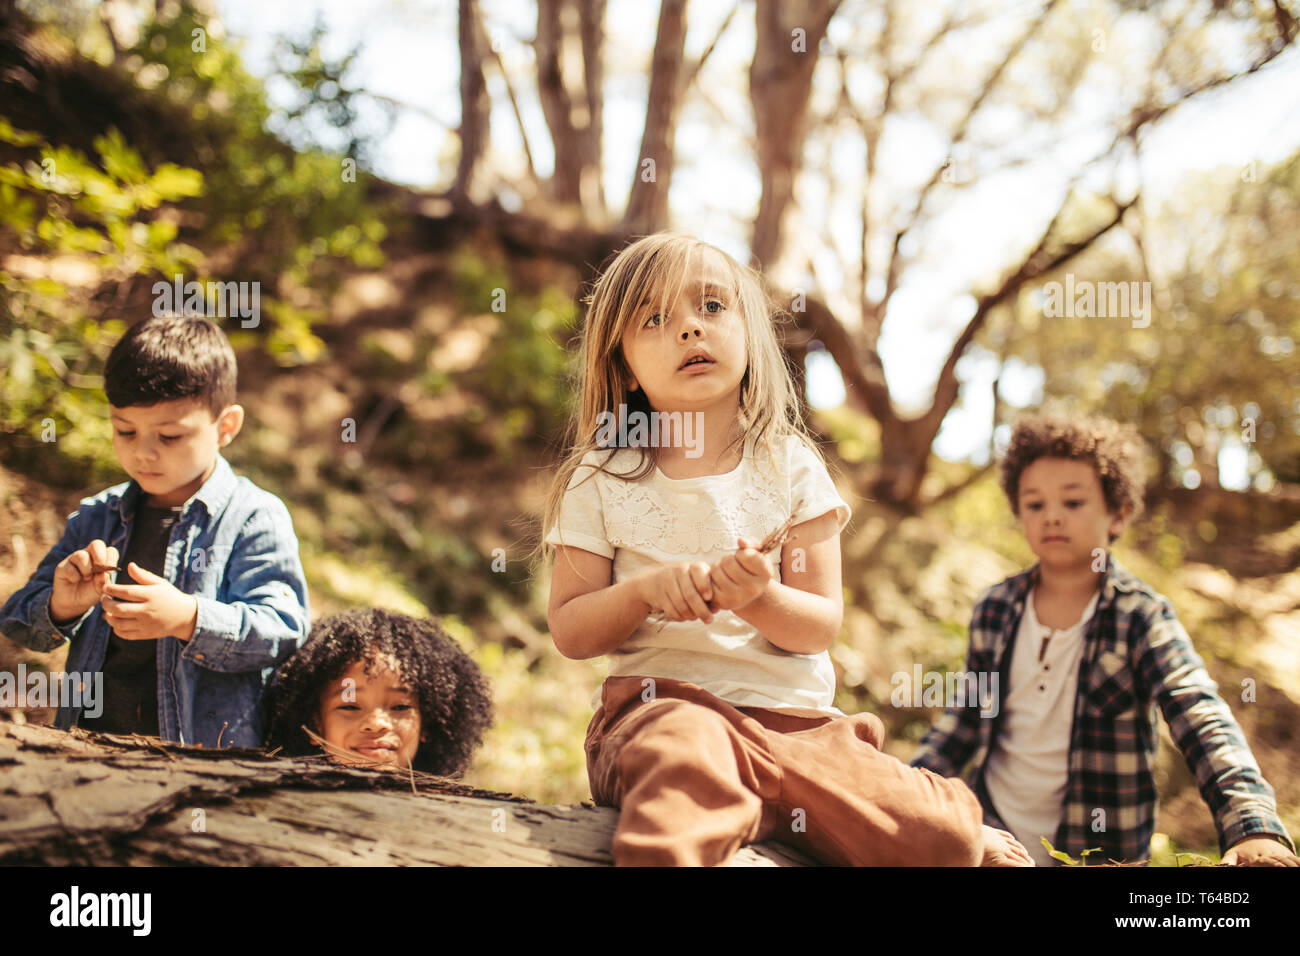 Cute girl sitting on a log with sticks in hand and her friends around in forest. Boys and a girl playing in forest. Stock Photo